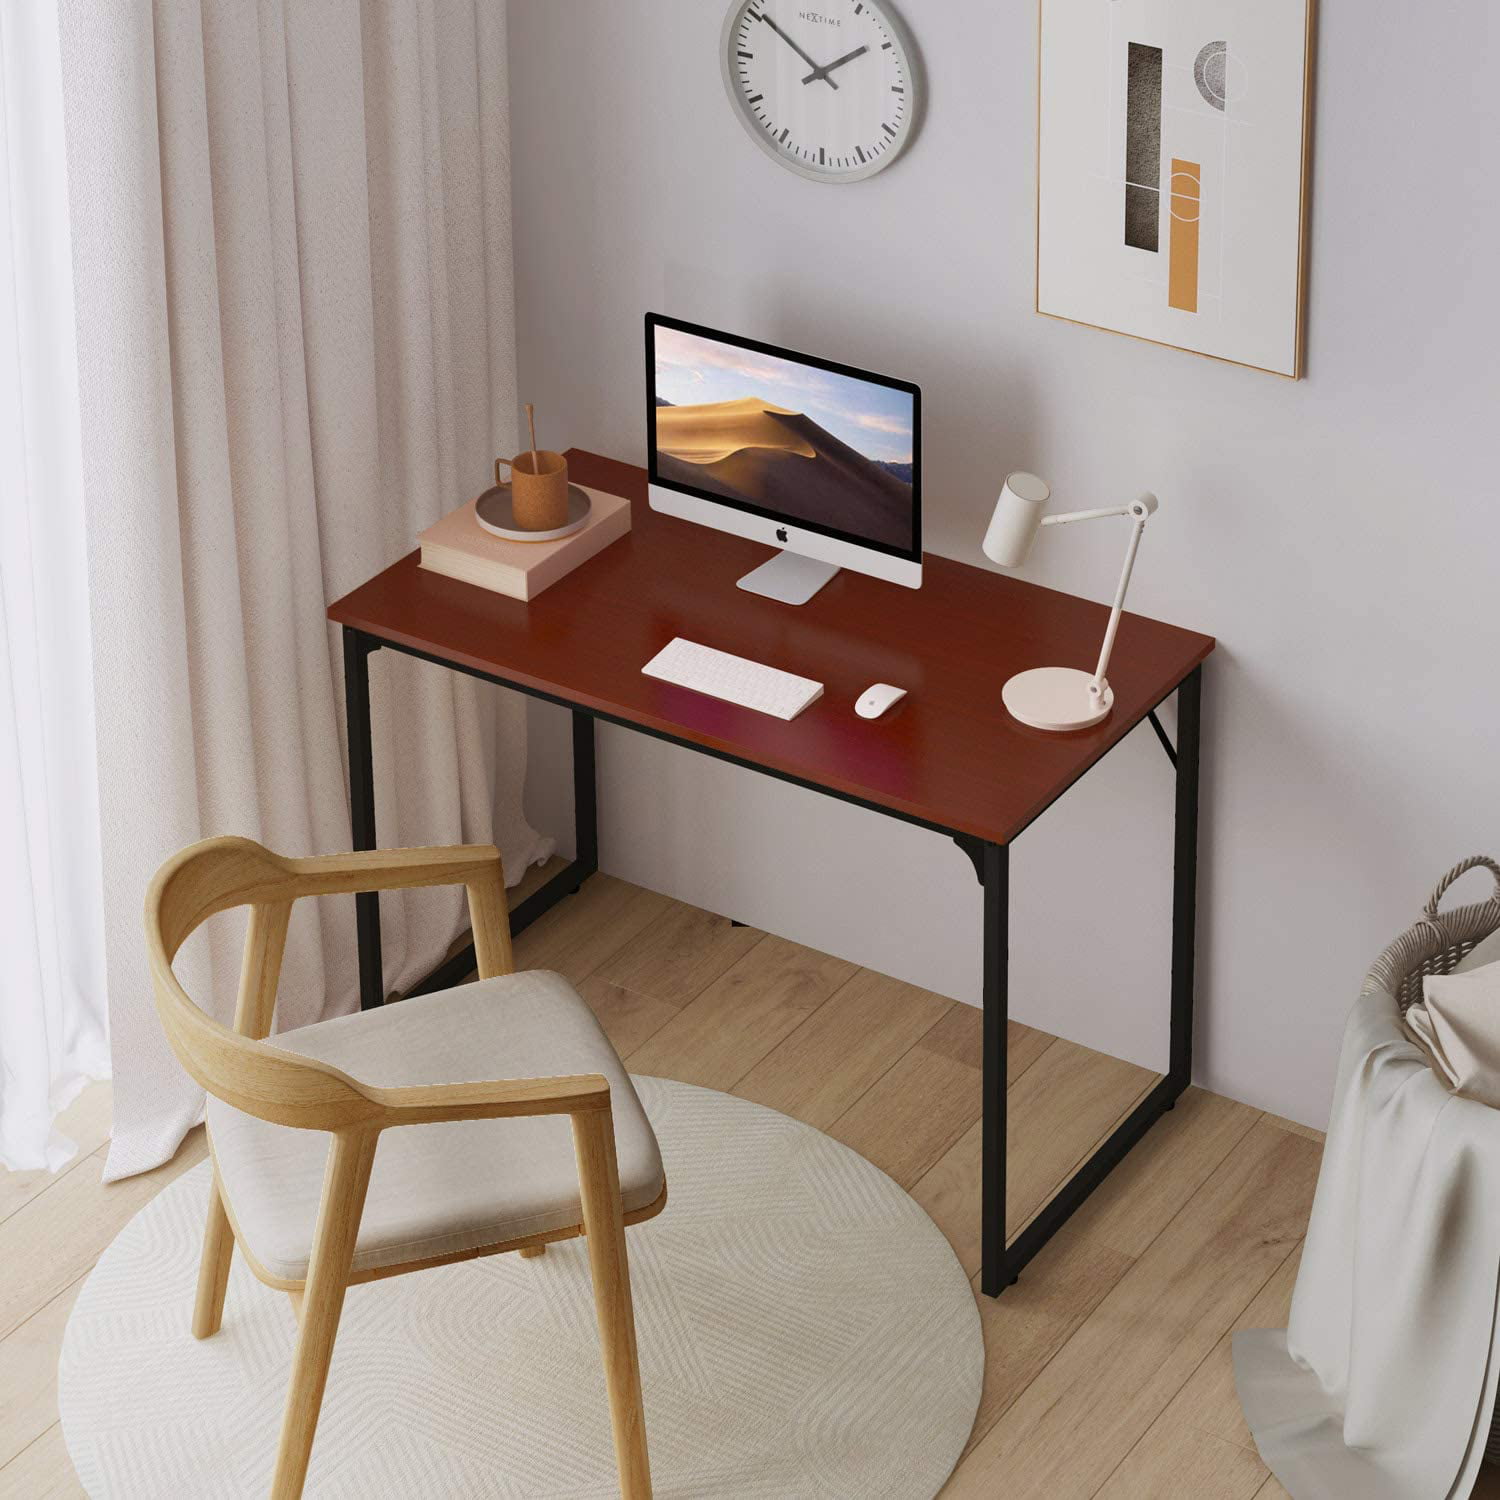 Modern Simple Style Desk for Home Office Coleshome Computer Desk 39 Sturdy Writing Desk,Walnut 